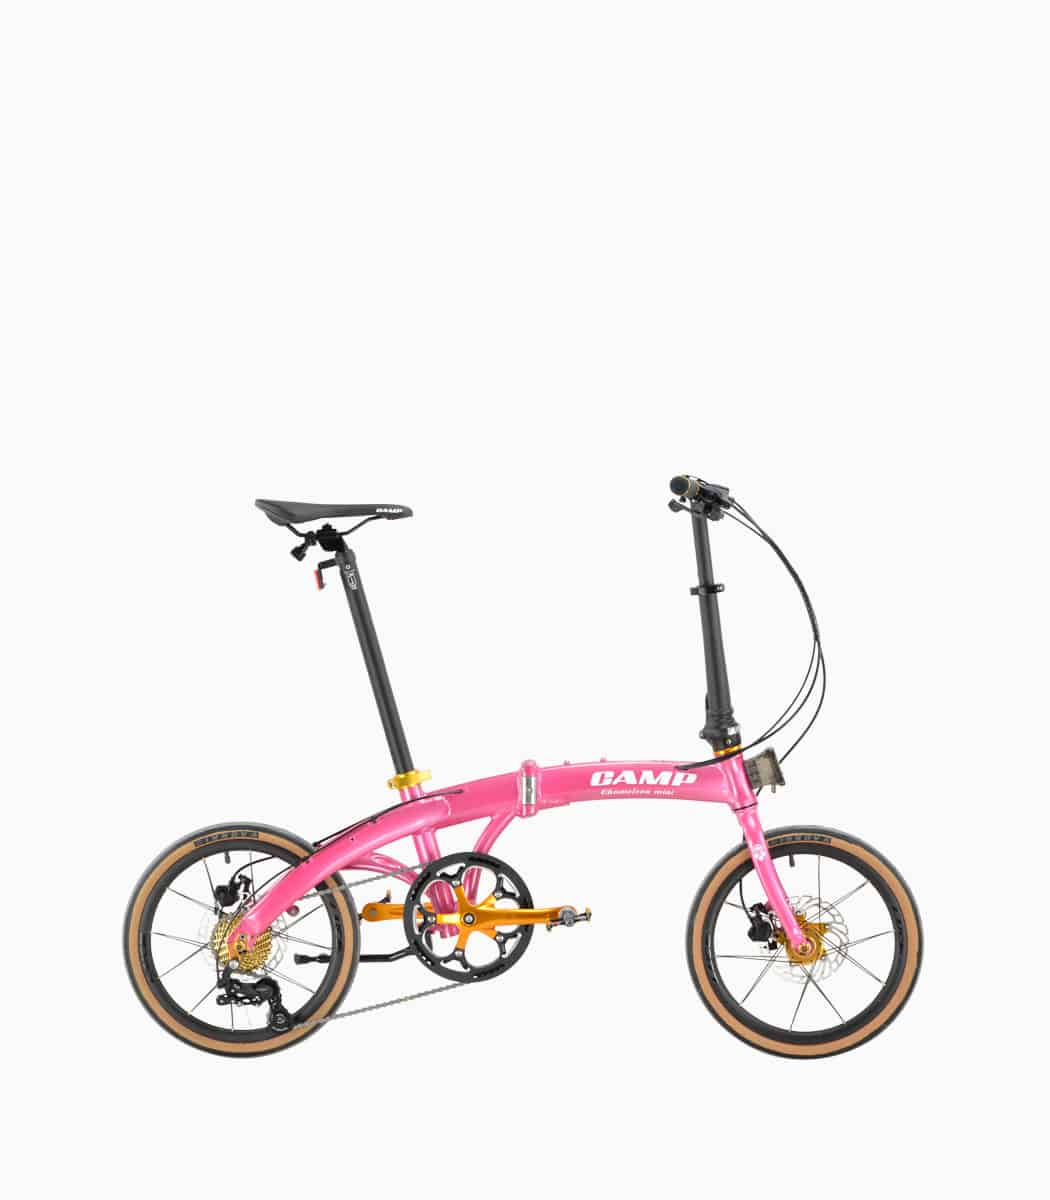 CAMP CHAMELEON Mini (PINK) foldable bicycle right